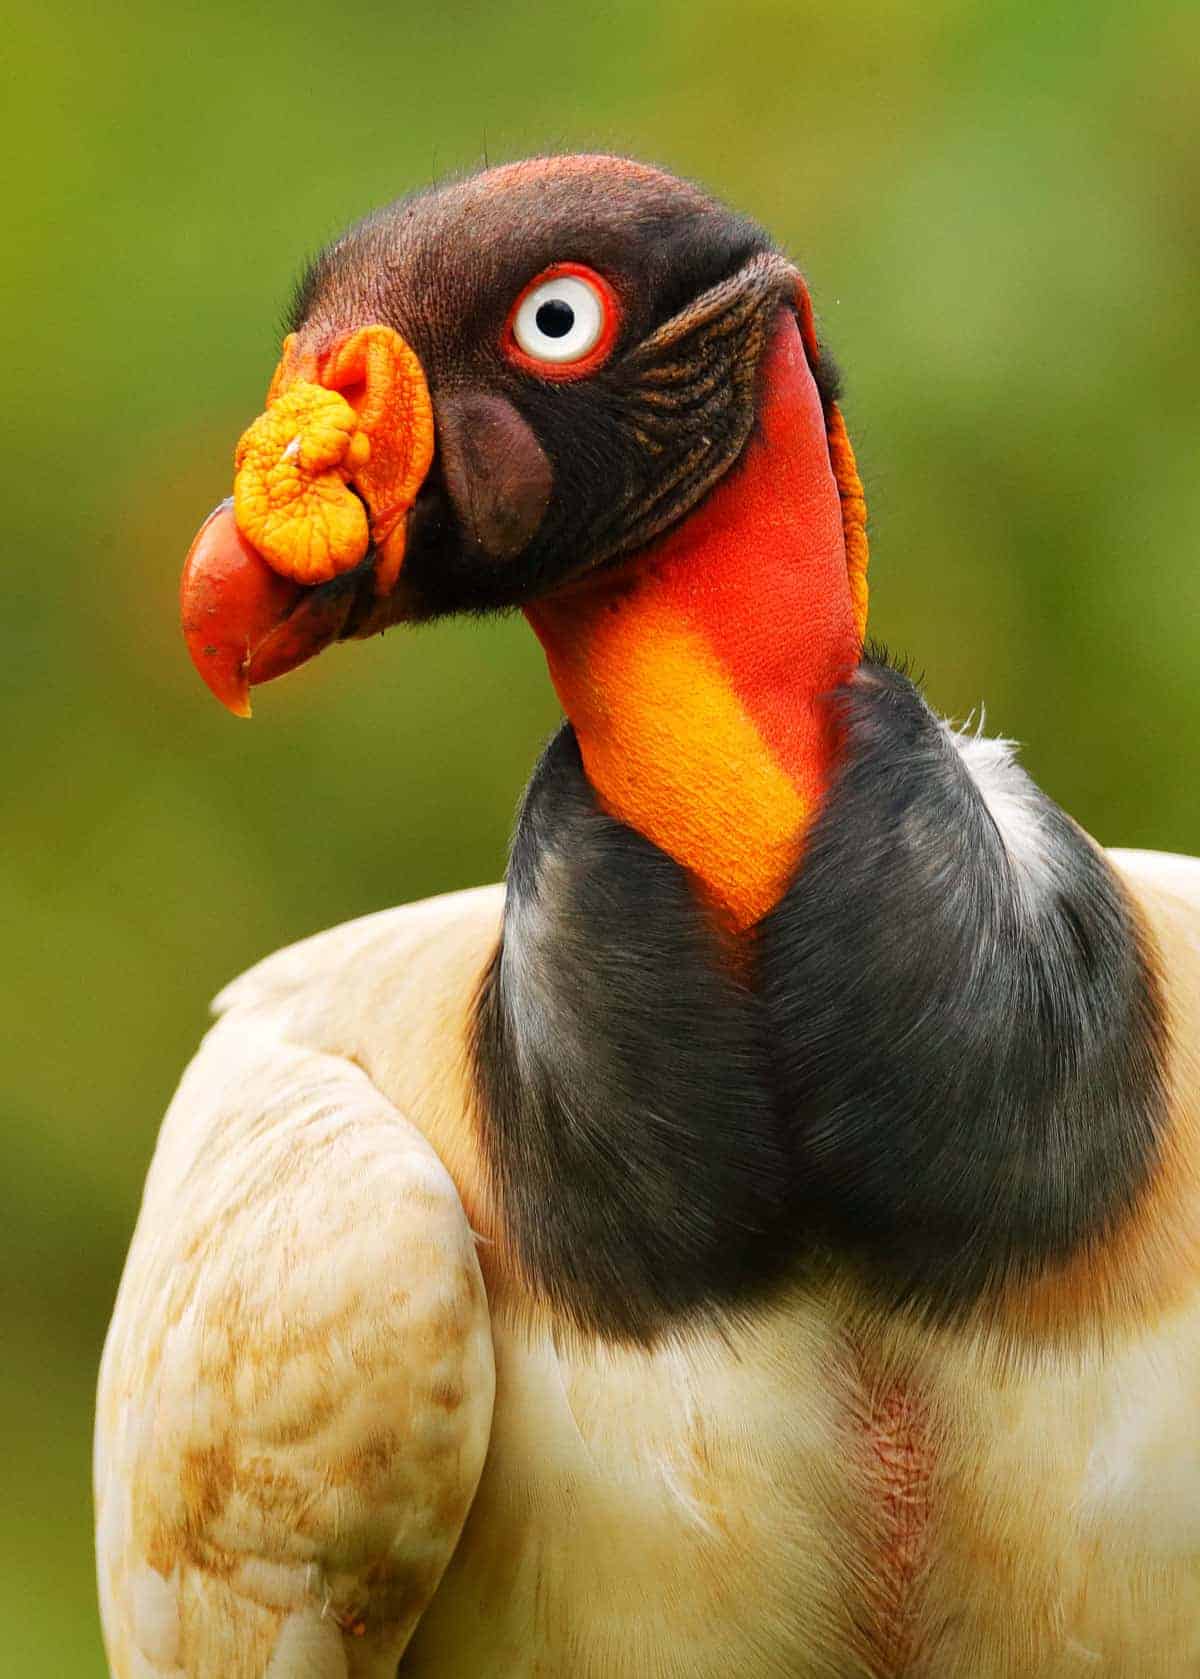 King vulture facts